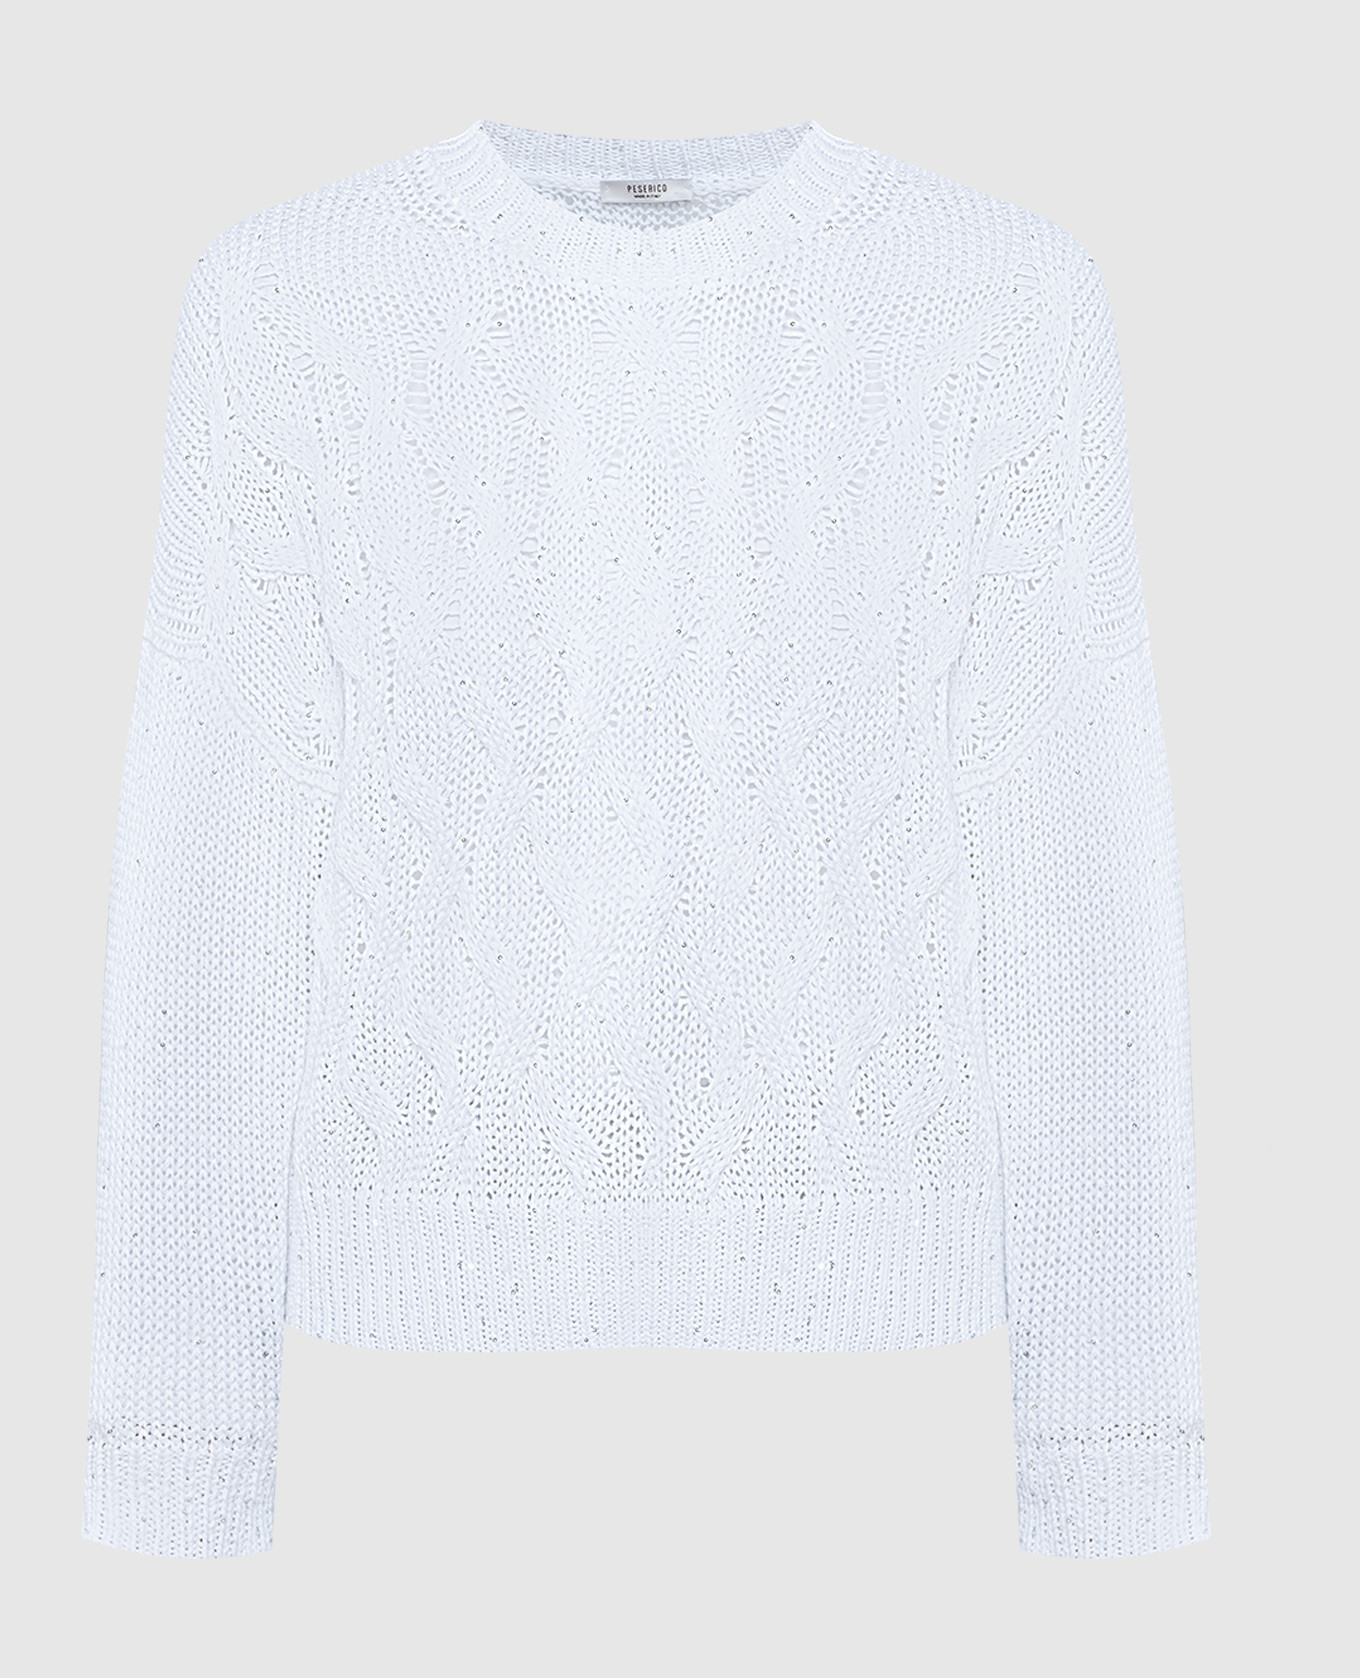 White sweater with a textured pattern with sequins